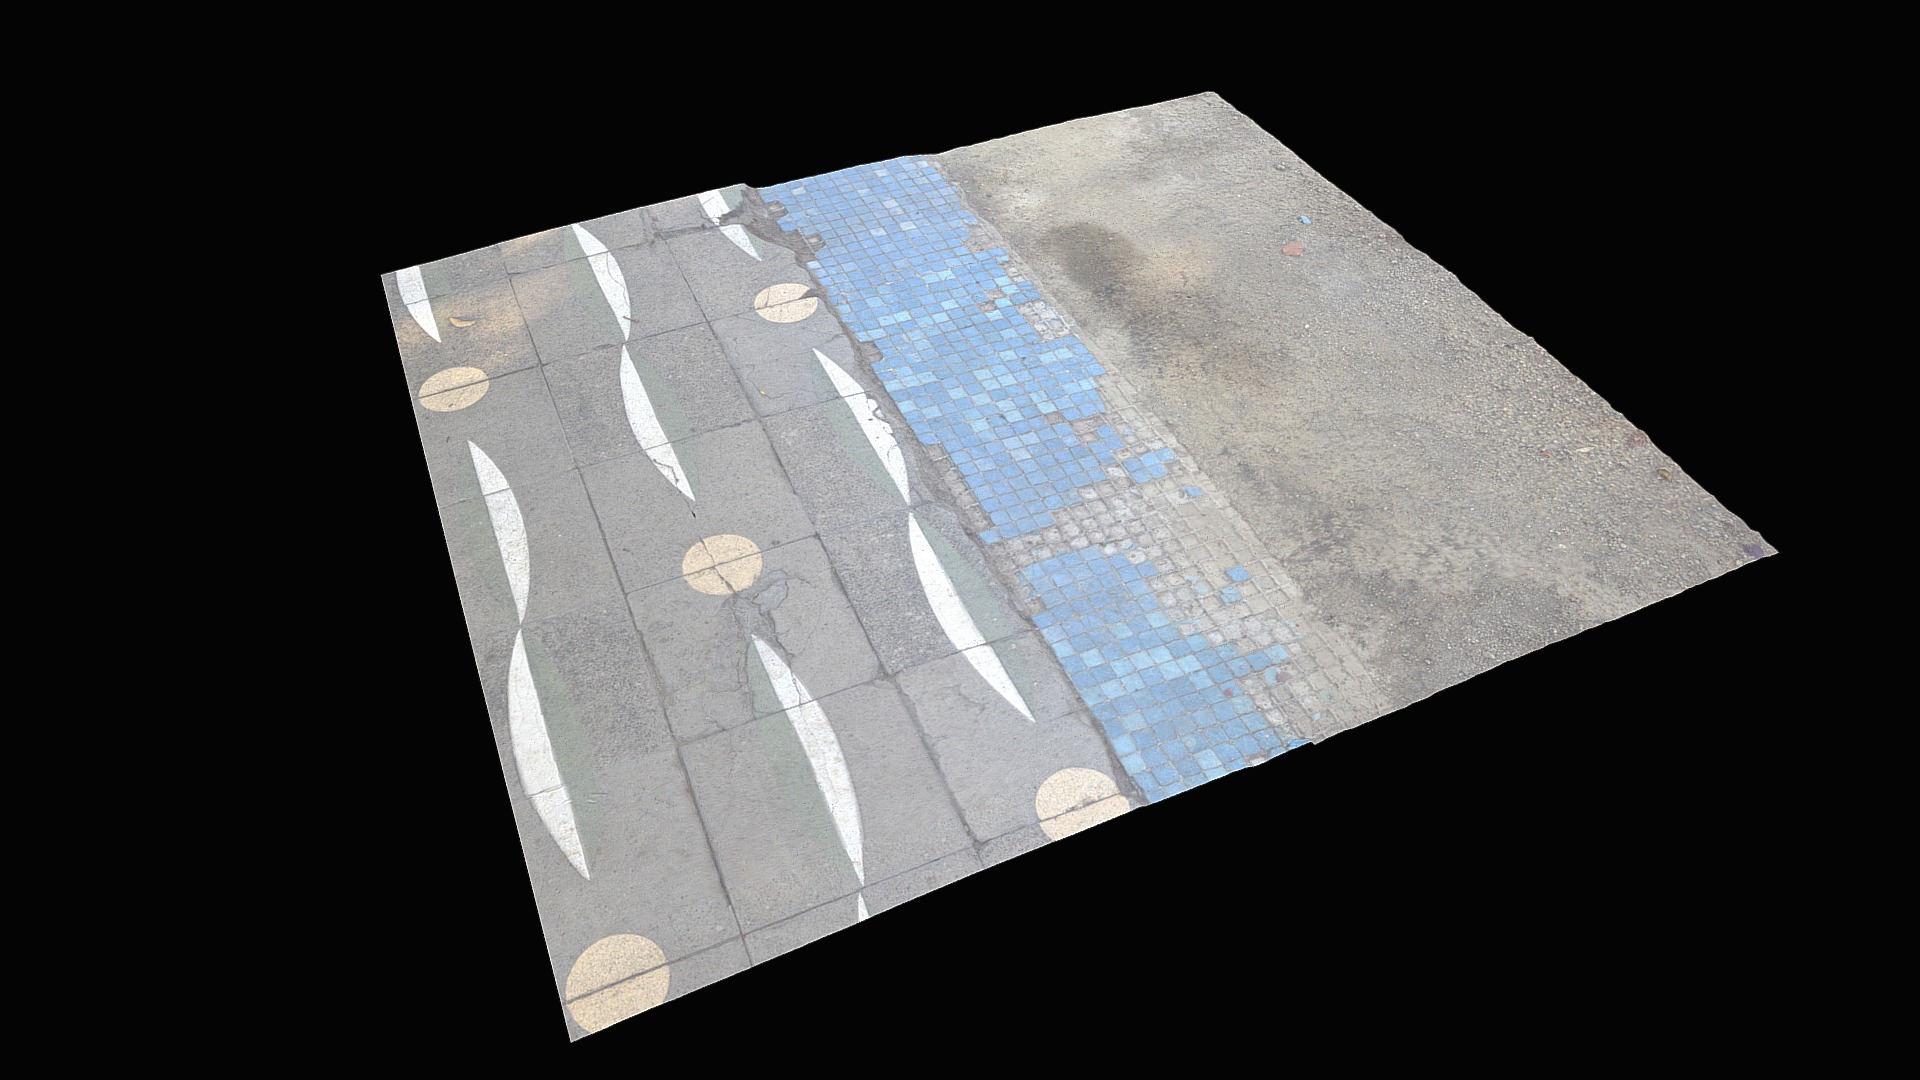 3D model 2018-01 – Santiago – Ground 3 (Tiles) - This is a 3D model of the 2018-01 - Santiago - Ground 3 (Tiles). The 3D model is about a black and white logo.